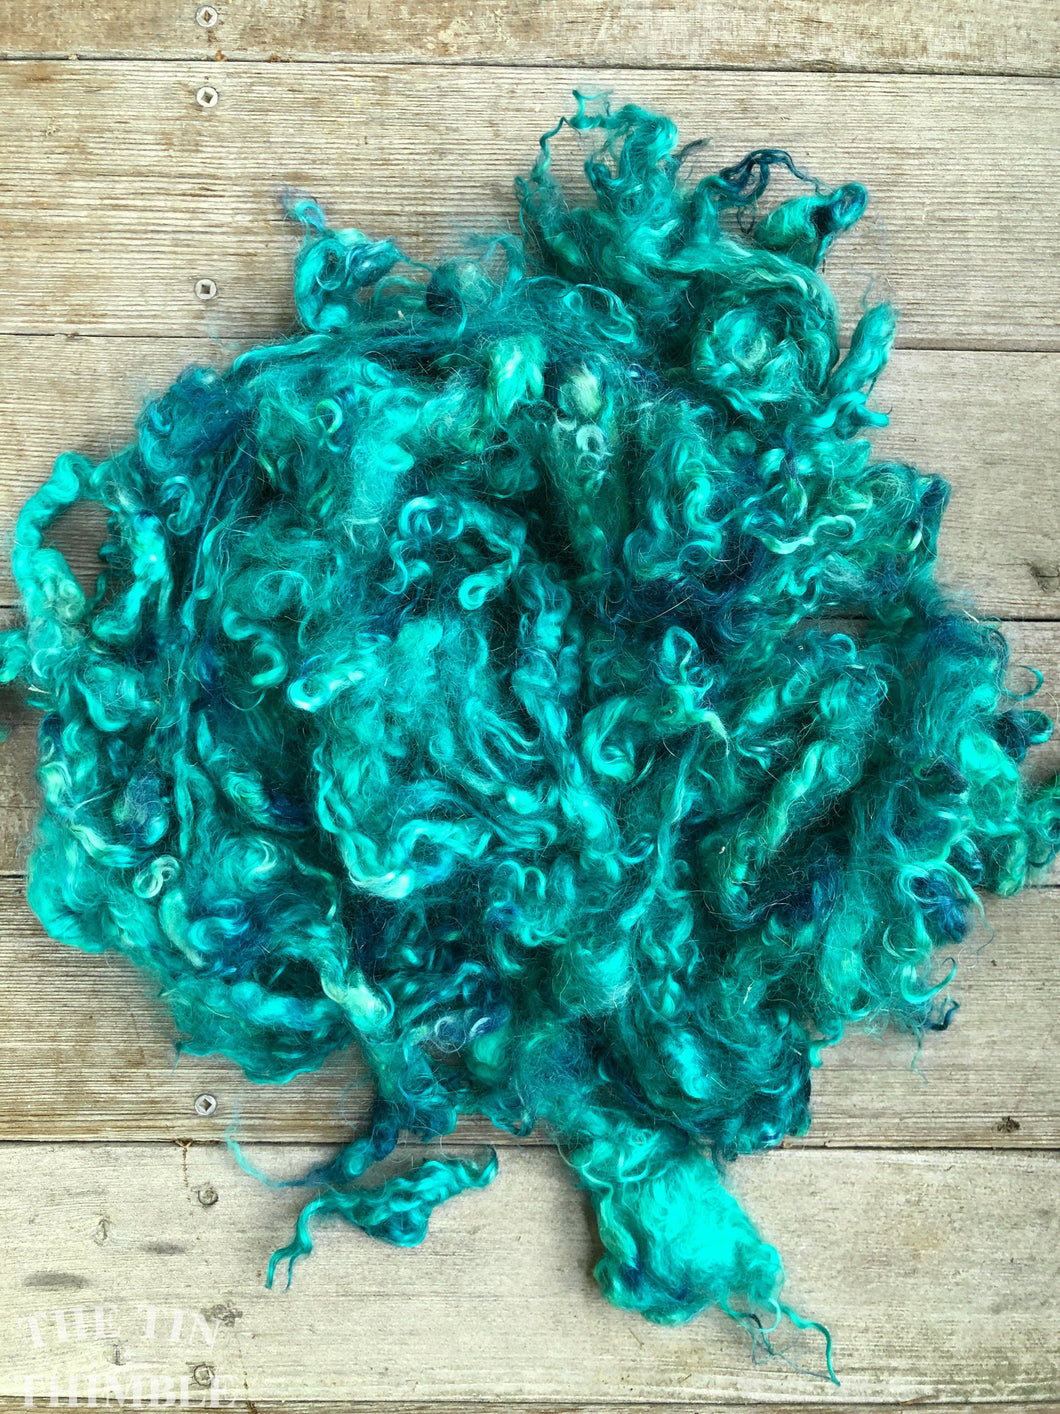 Mohair Locks for Felting, Spinning or Weaving - 1/4 Oz - Hand Dyed in the Color 'Ocean'